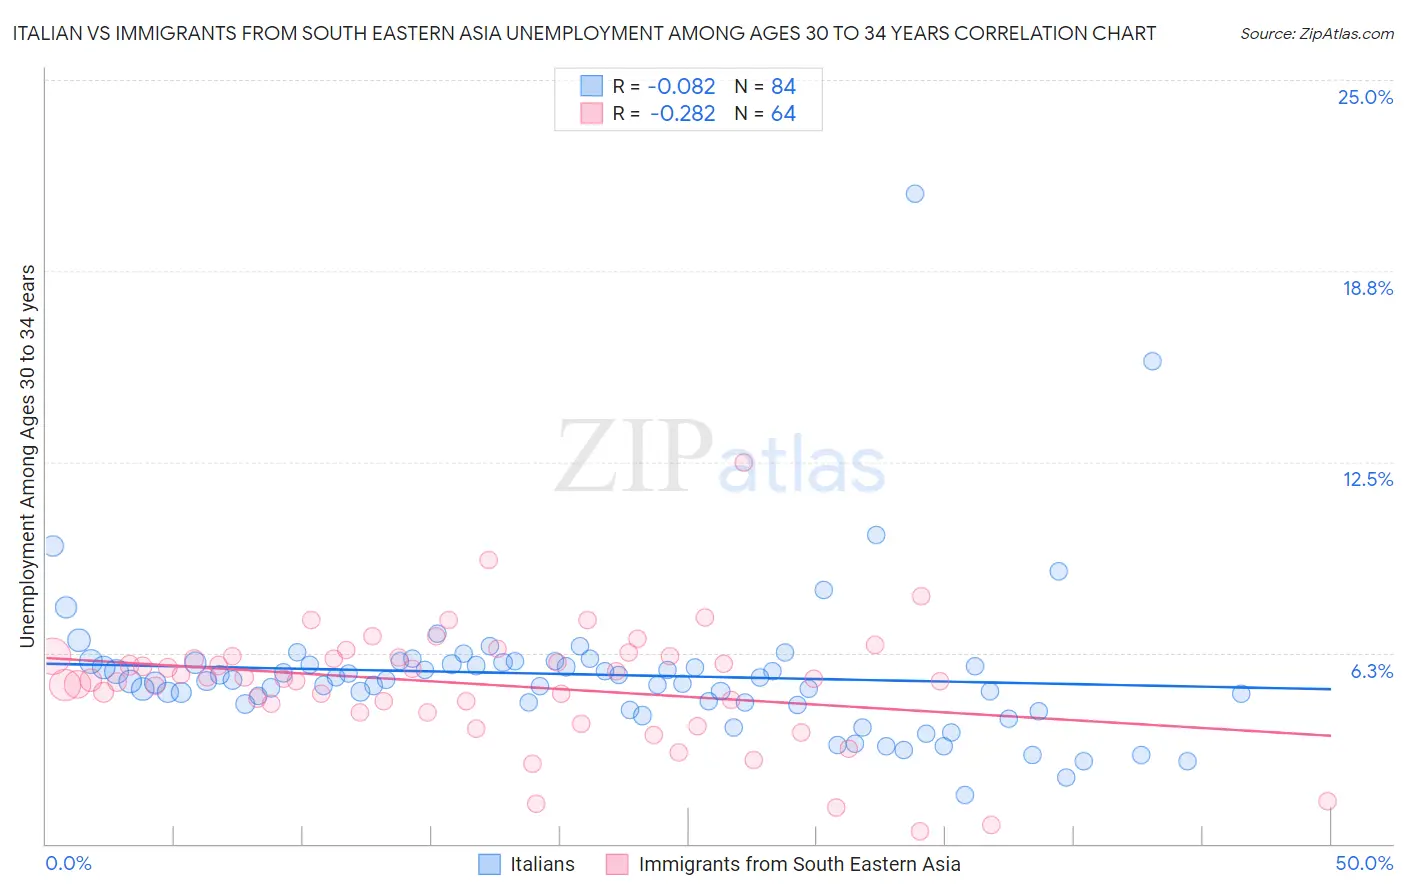 Italian vs Immigrants from South Eastern Asia Unemployment Among Ages 30 to 34 years